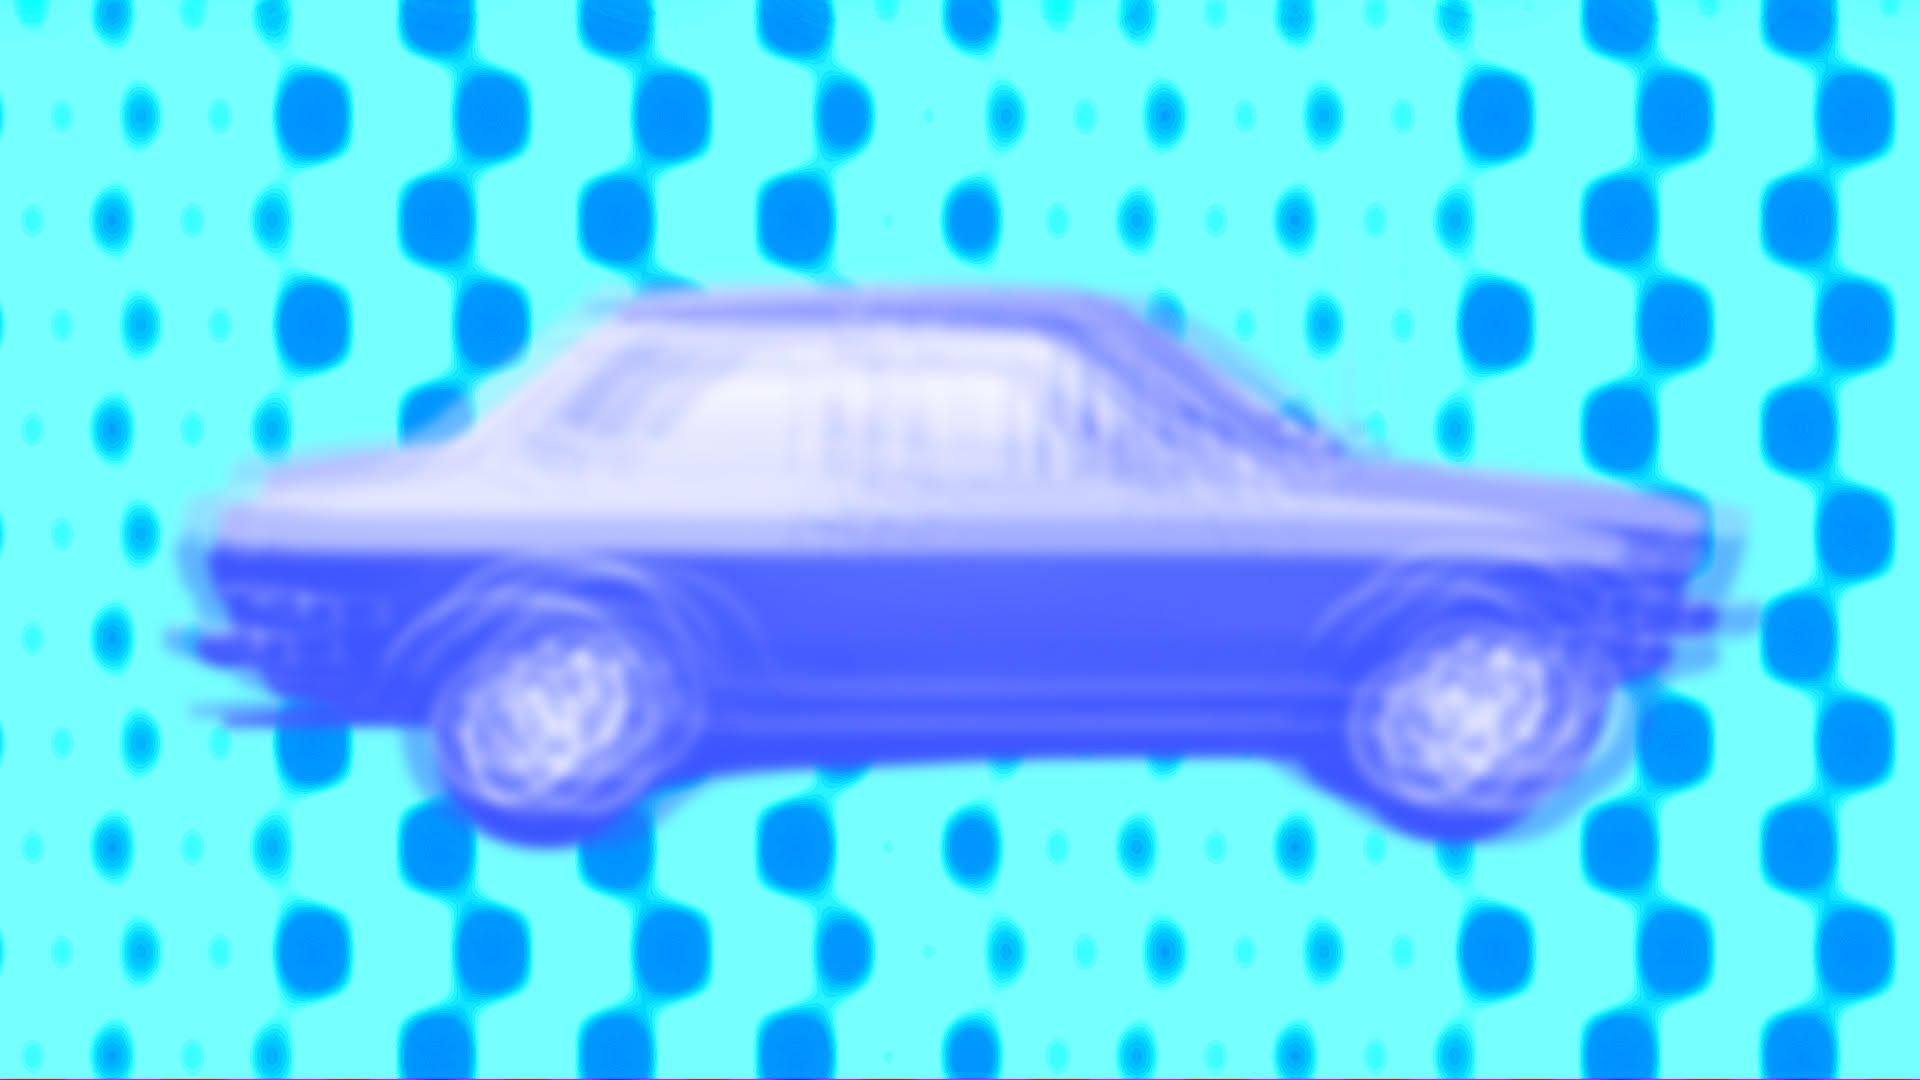 blurry illustrated car against a background of dots